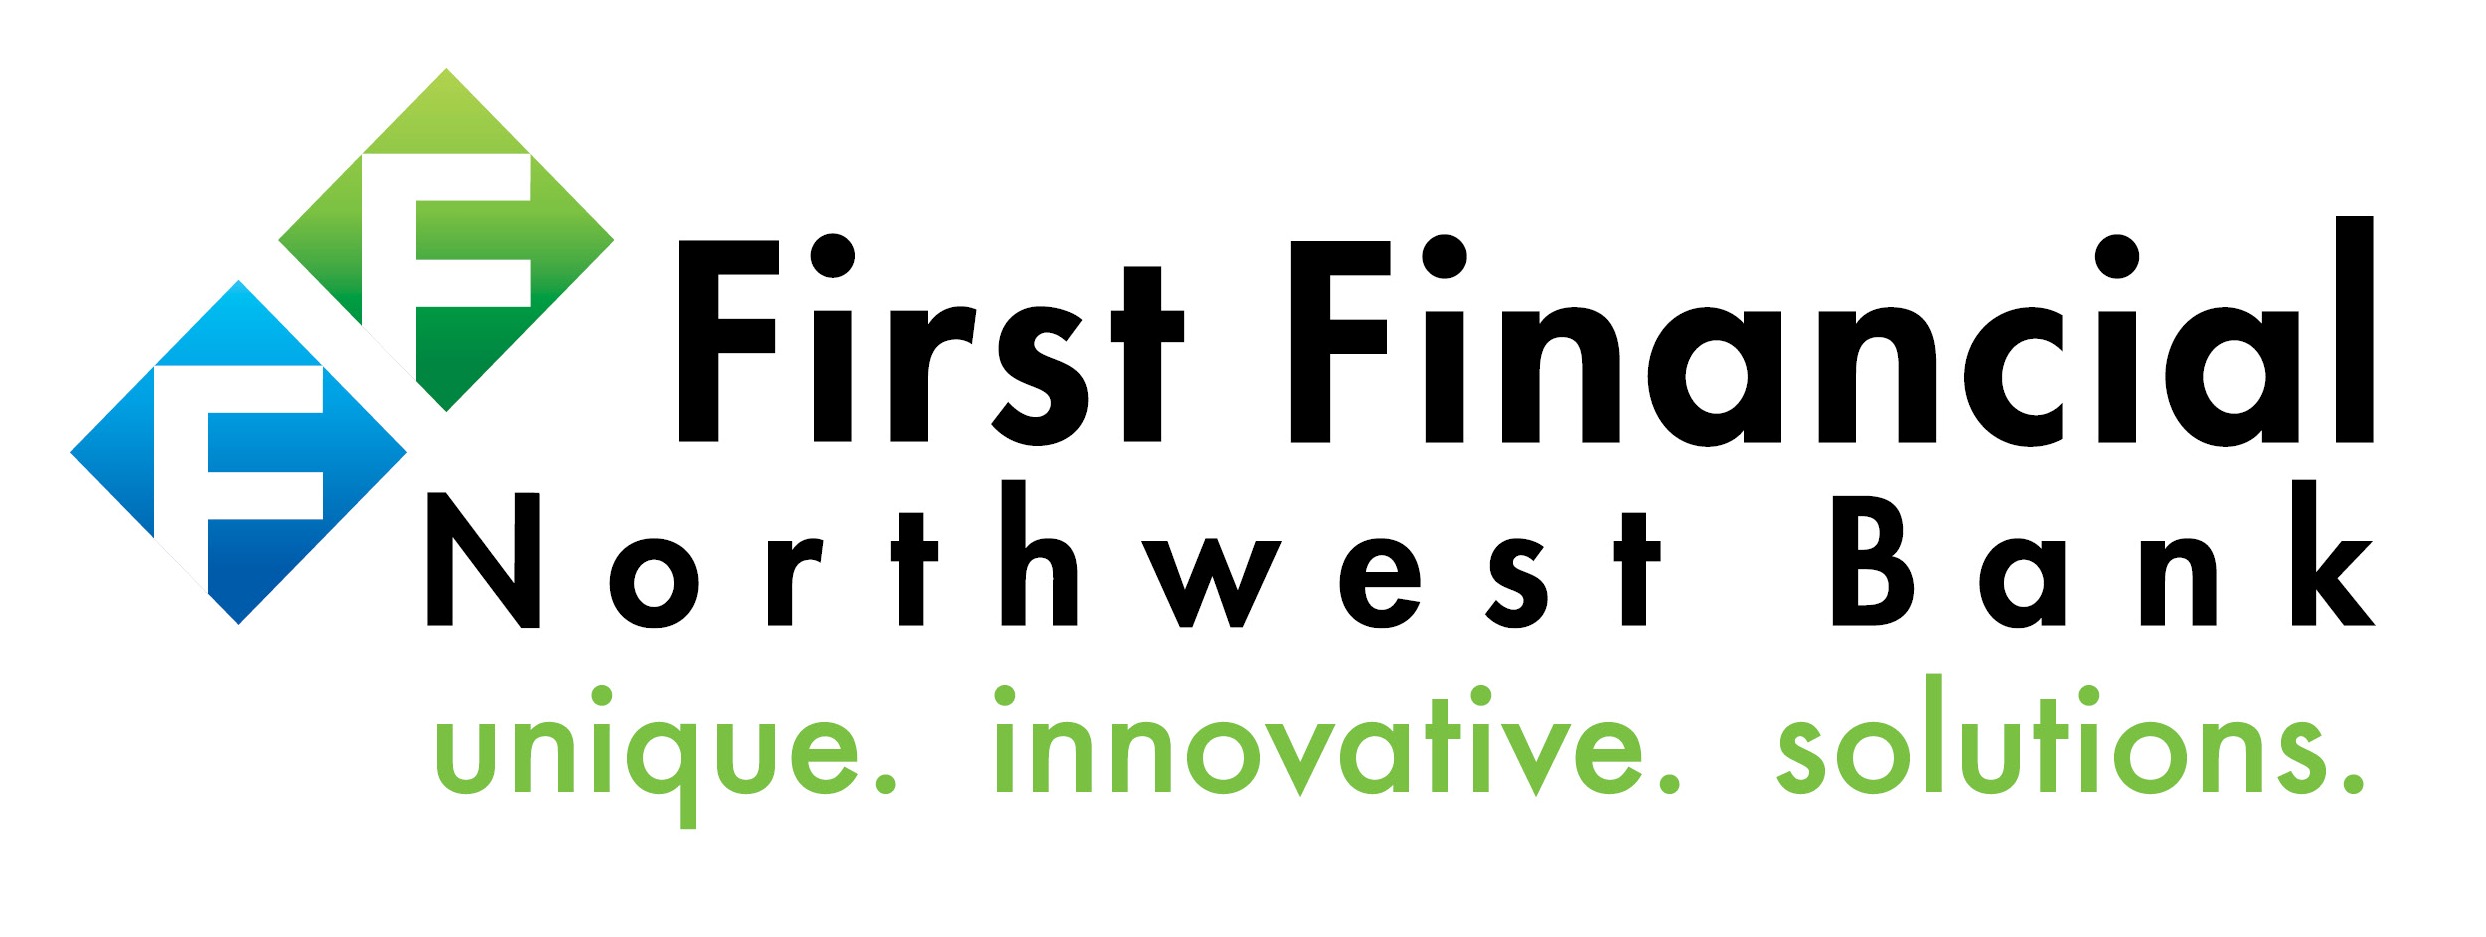 First Financial Northwest Bank logo. A white rectangular logo with 2 diamonds, blue and green with 